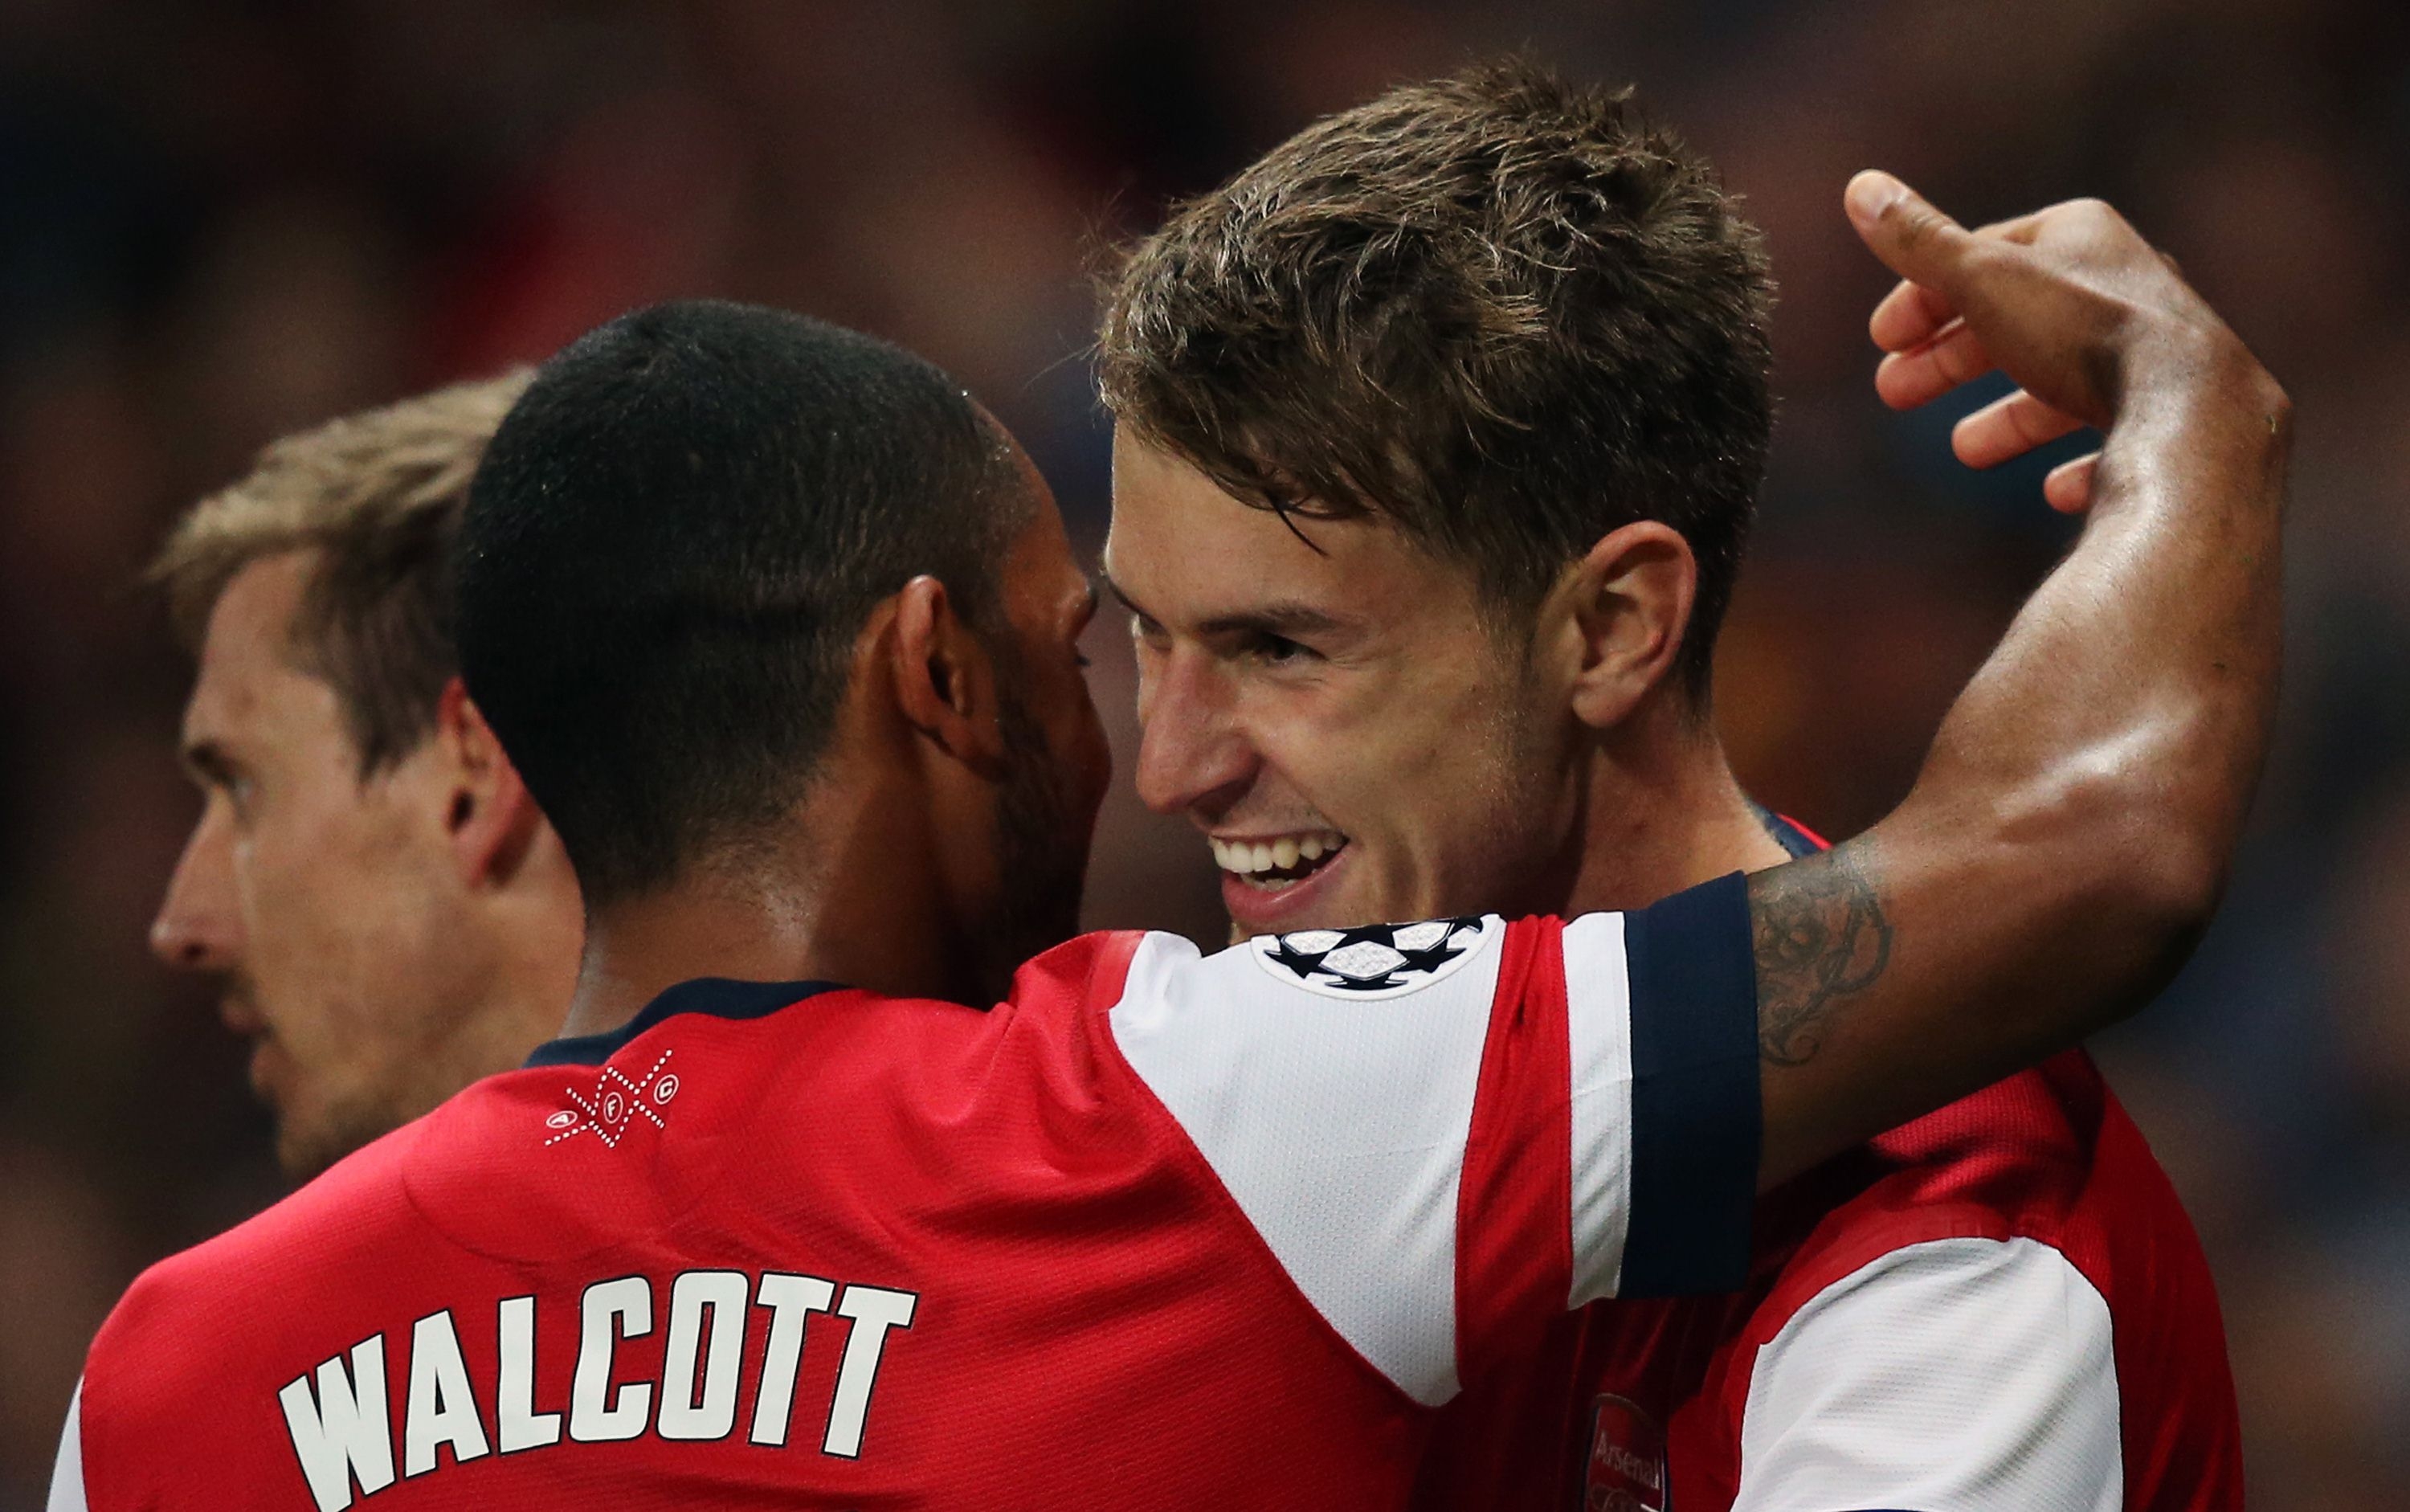 Arsenal's English midfielder Theo Walcott (left) celebrates with Arsenal's Welsh midfielder Aaron Ramsey (right) during the Uefa Champions League Play-Off football match in north London on Tuesday. Photo: AFP